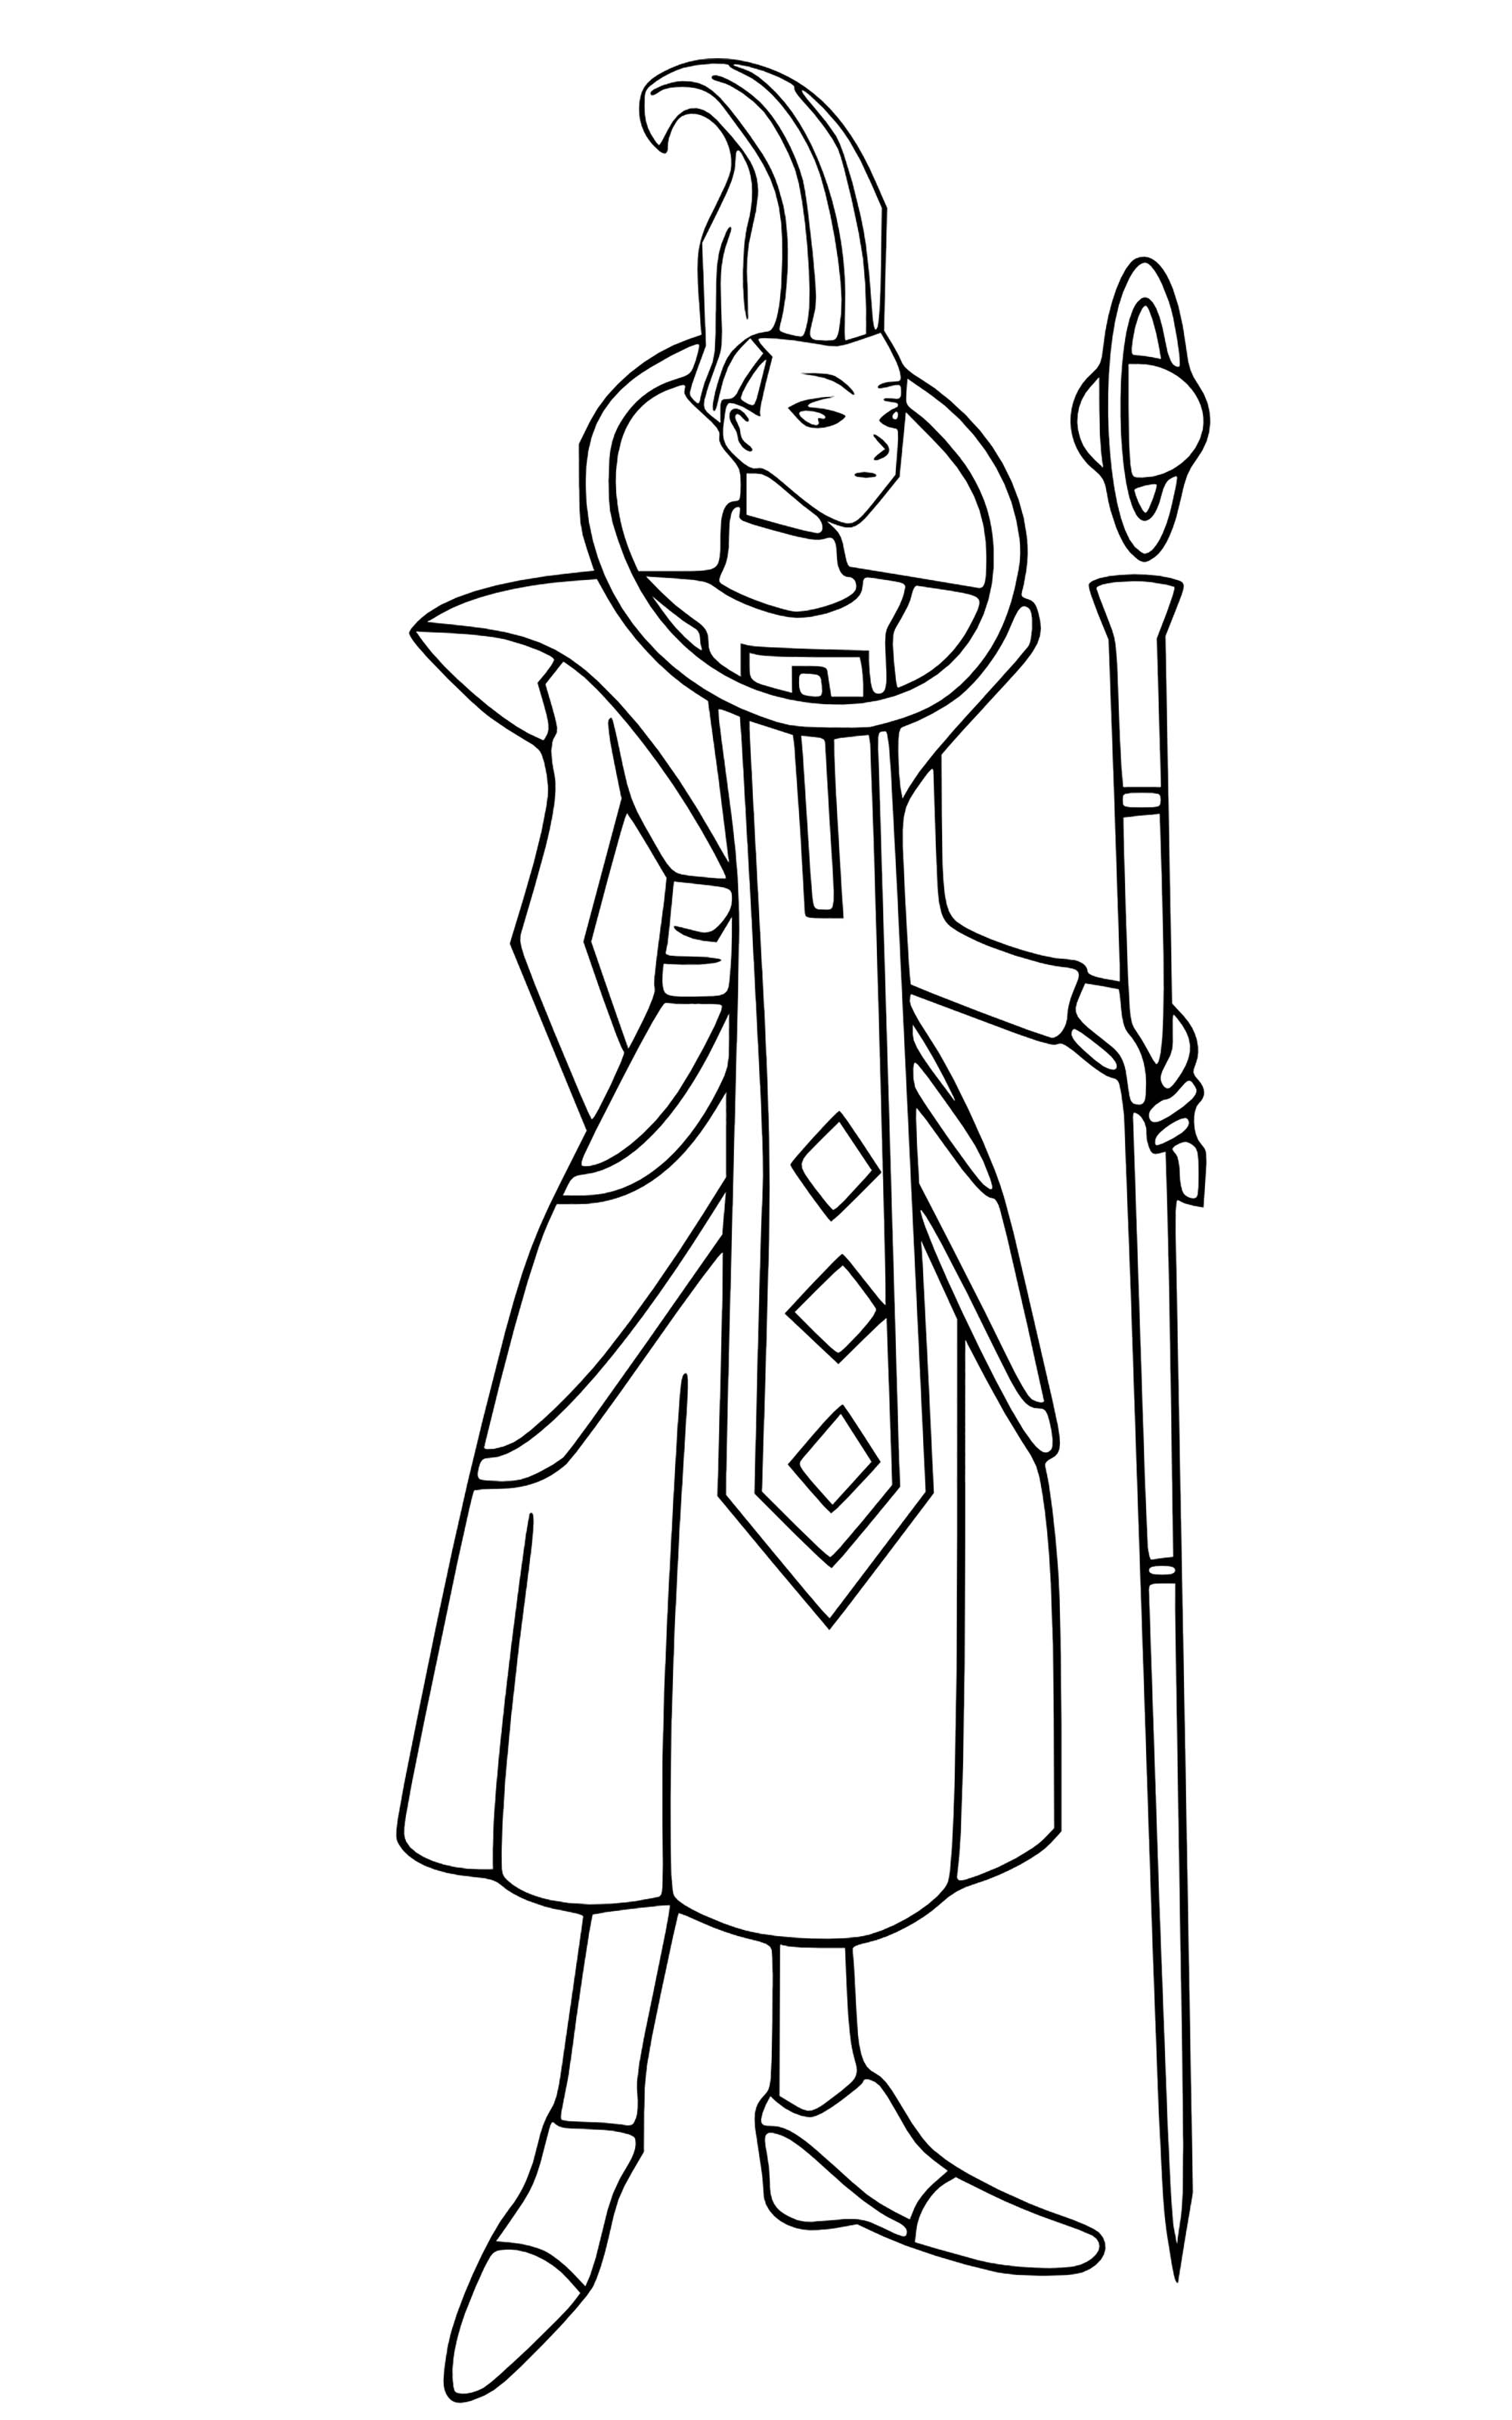 Download Whis - Dragon Ball Z Kids Coloring Pages